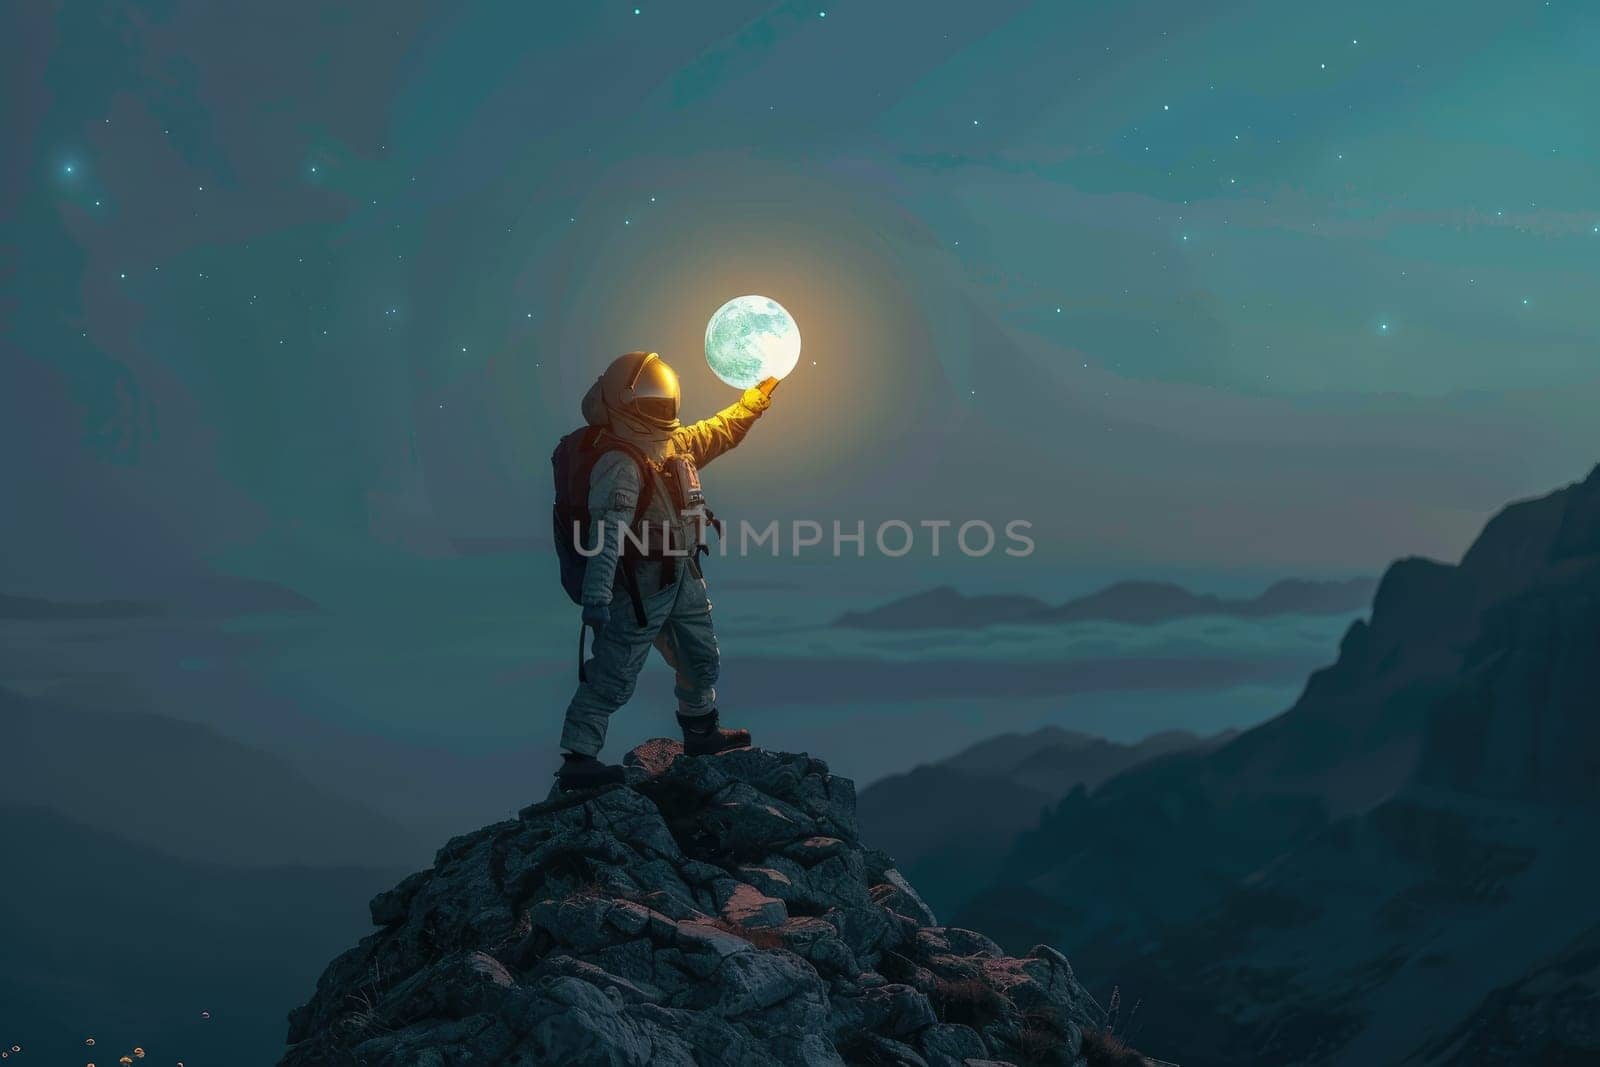 Space suit, standing on top of a mountain, reaching out to touch the full moon by Chawagen